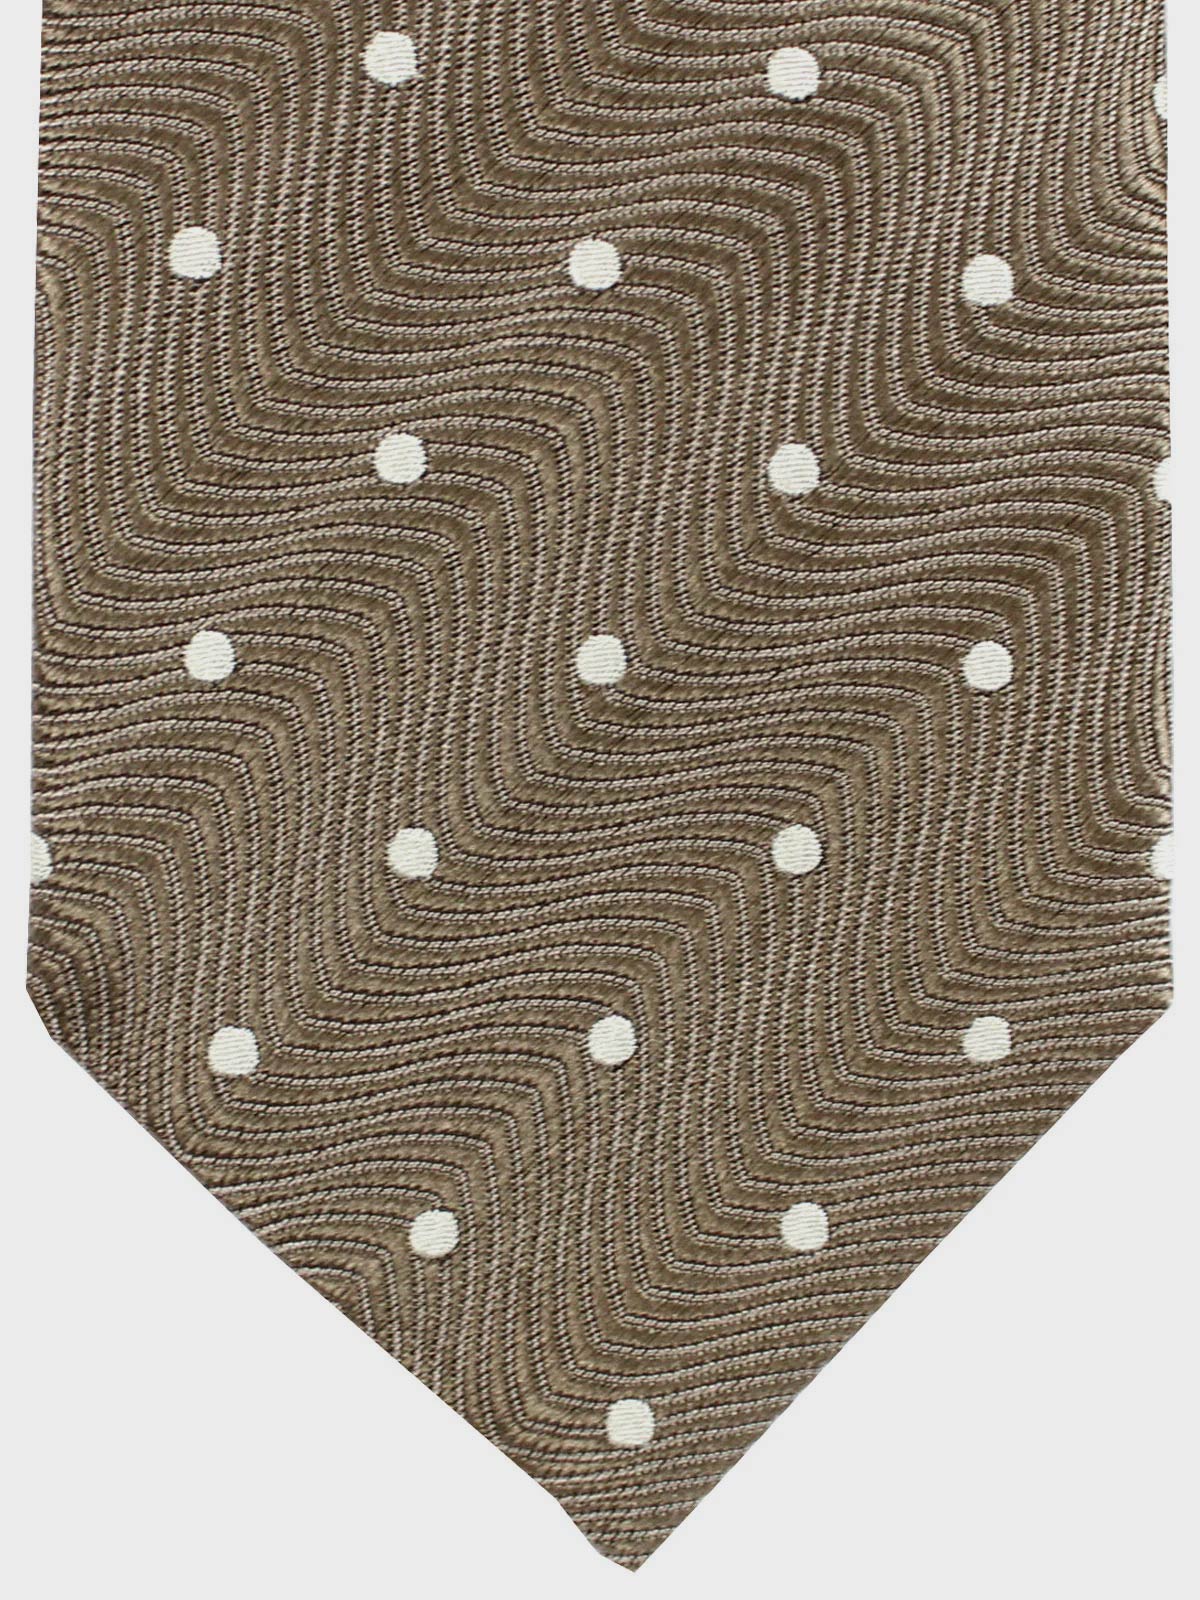 Tom Ford Tie Taupe Silver Polka Dots SALE